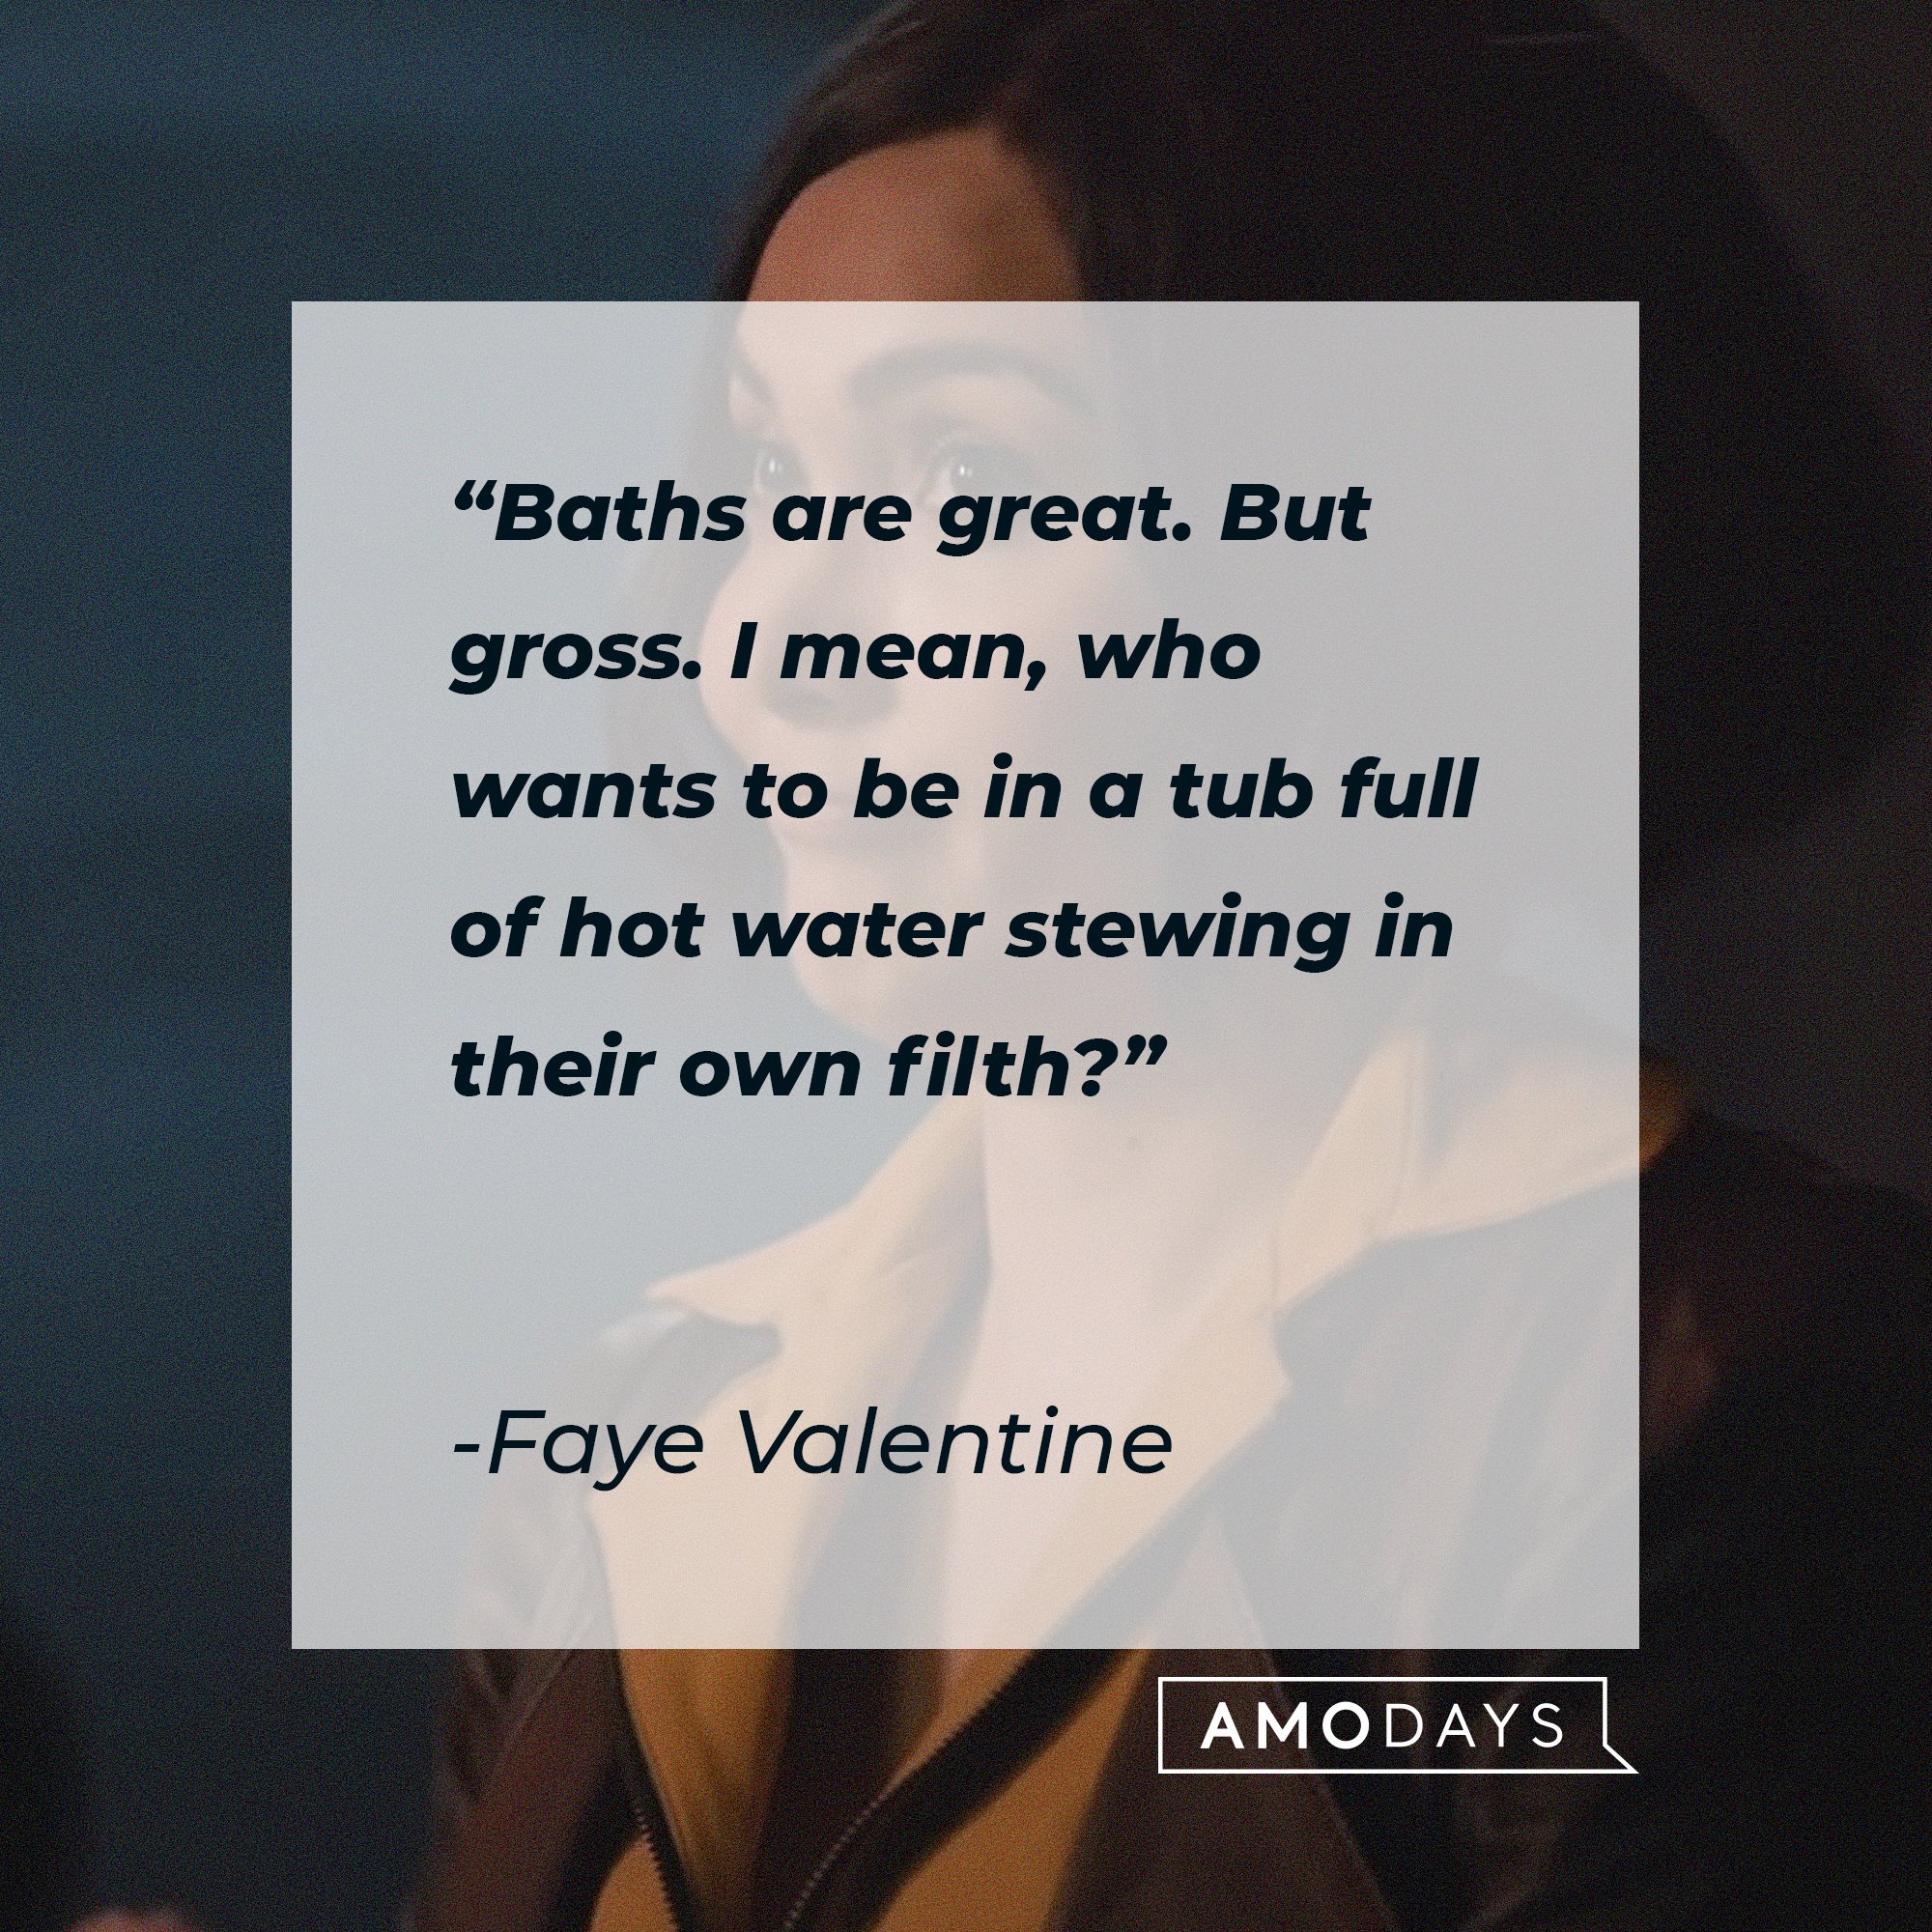  Faye Valentine's quote: "Baths are great. But gross. I mean, who wants to be in a tub full of hot water stewing in their own filth?" | Image: AmoDays